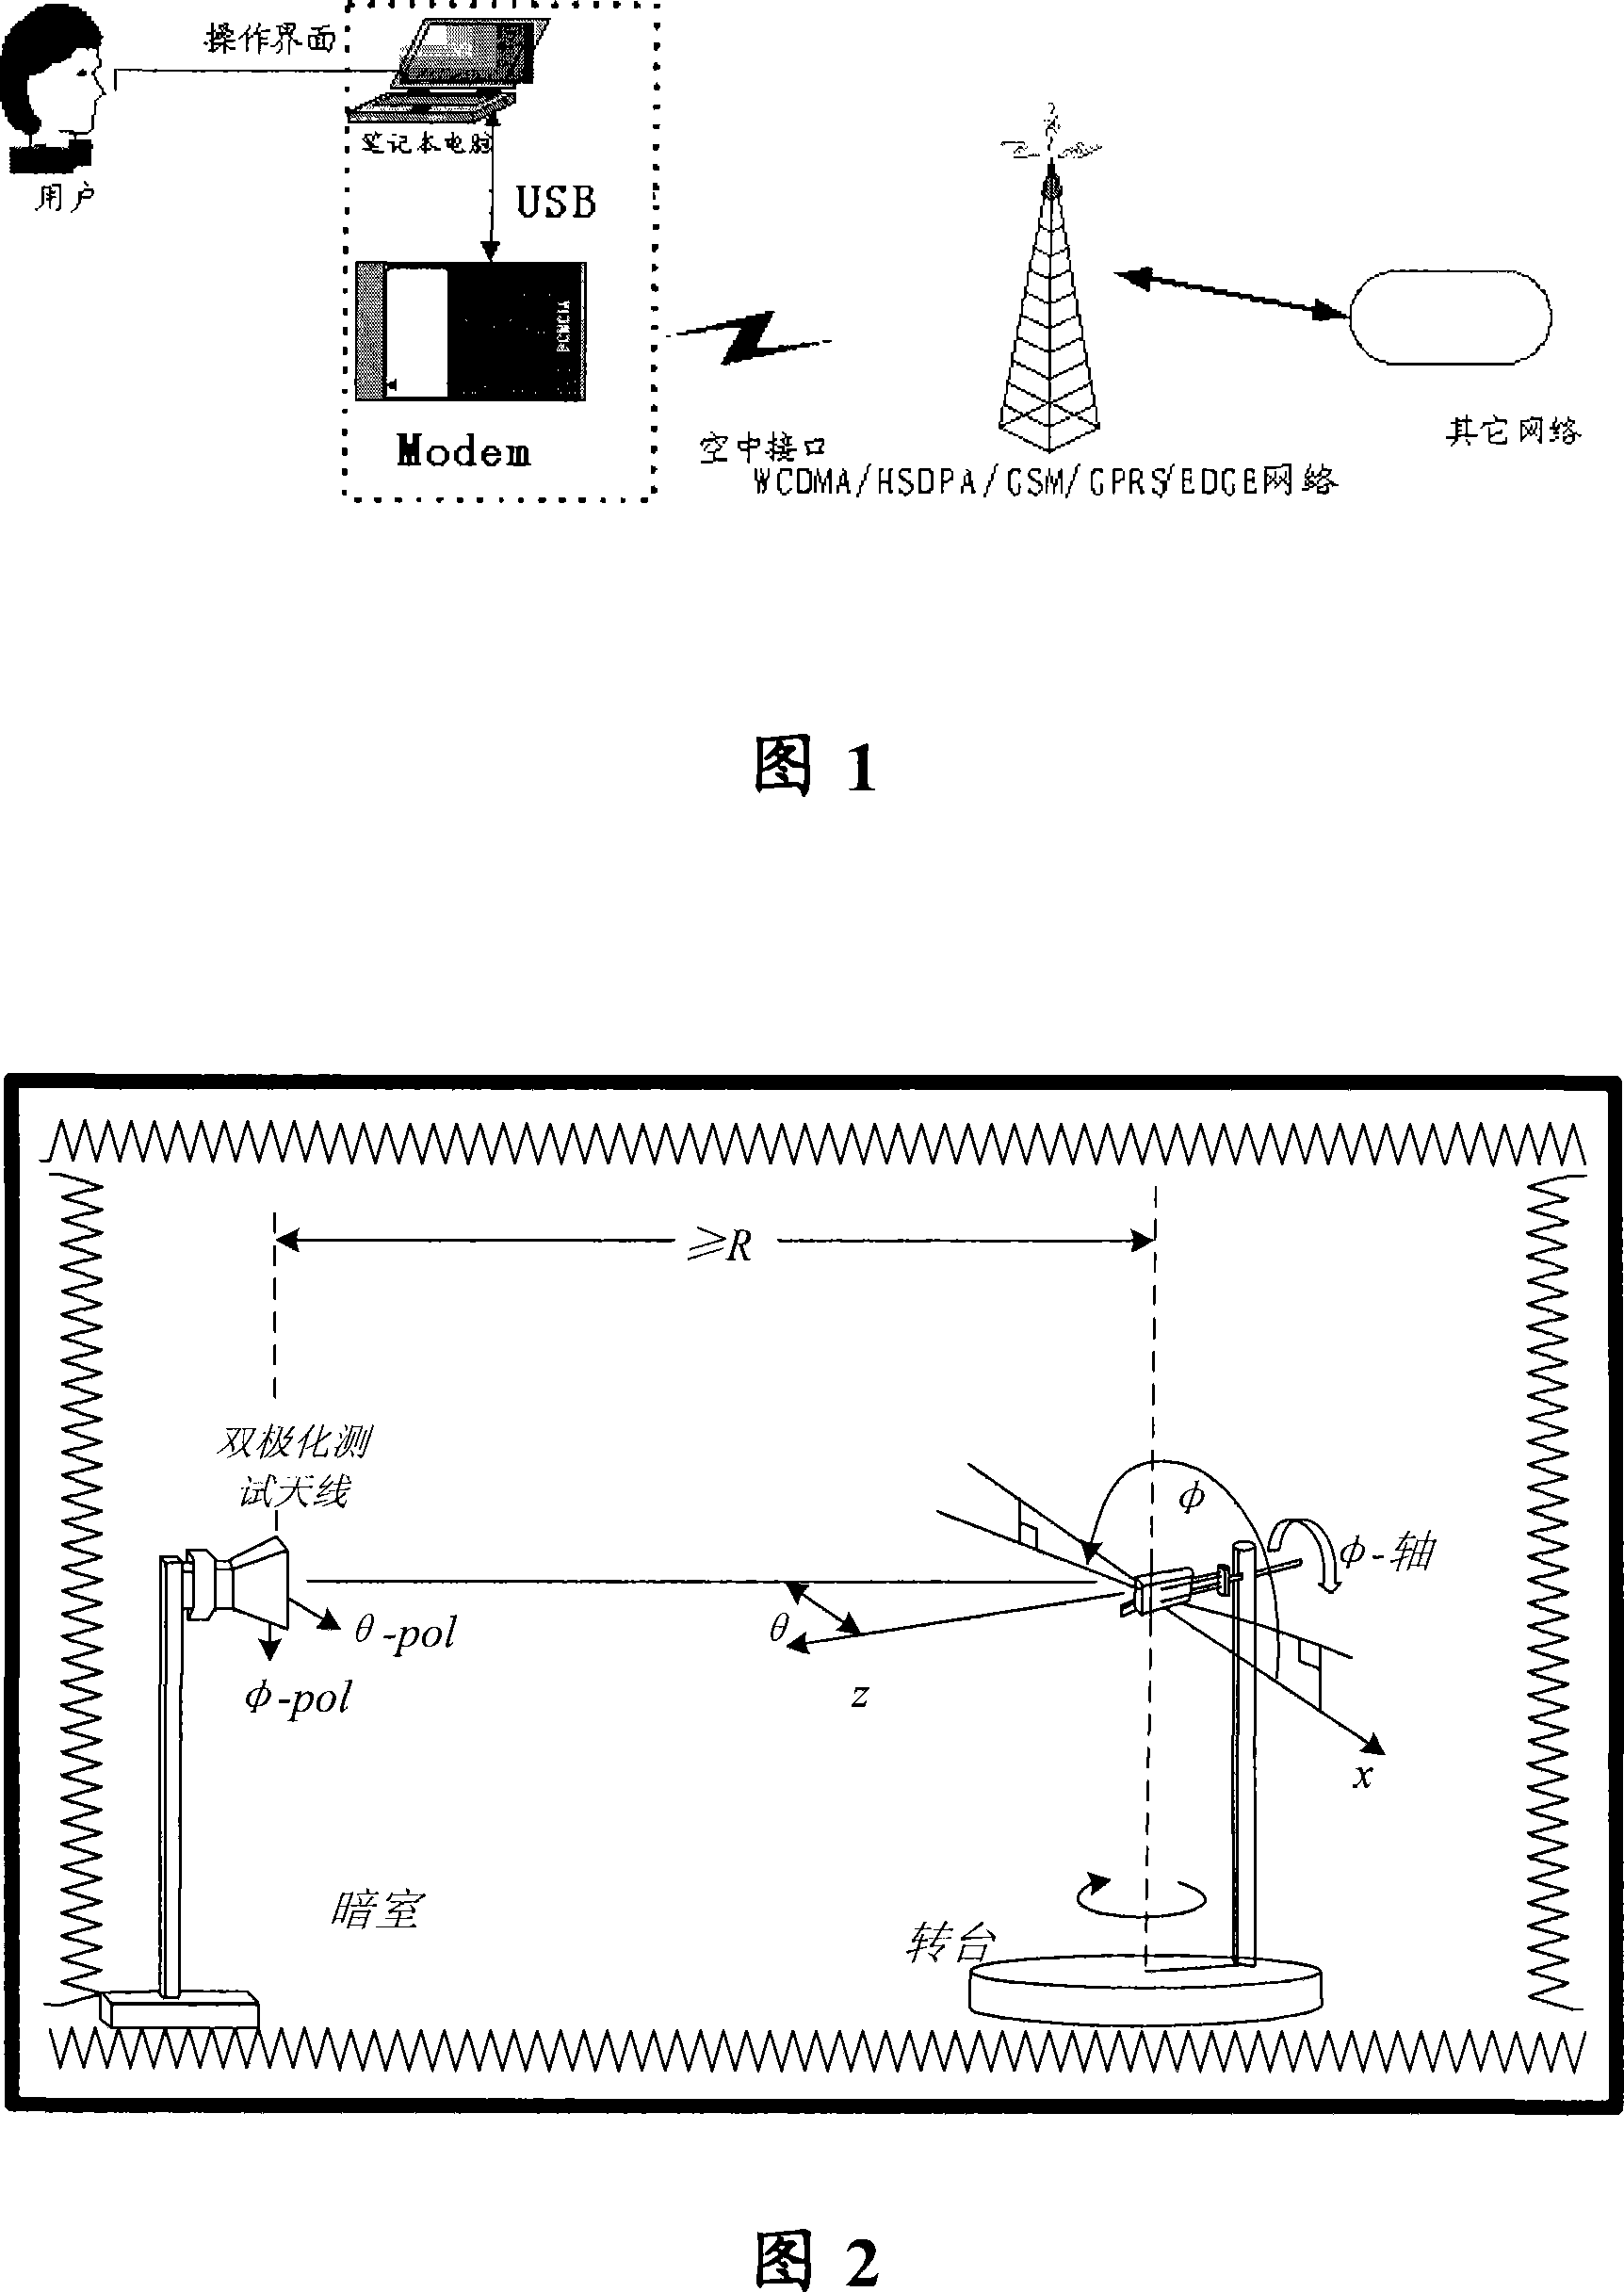 A test system and test method on aerial performance of wireless USB modem